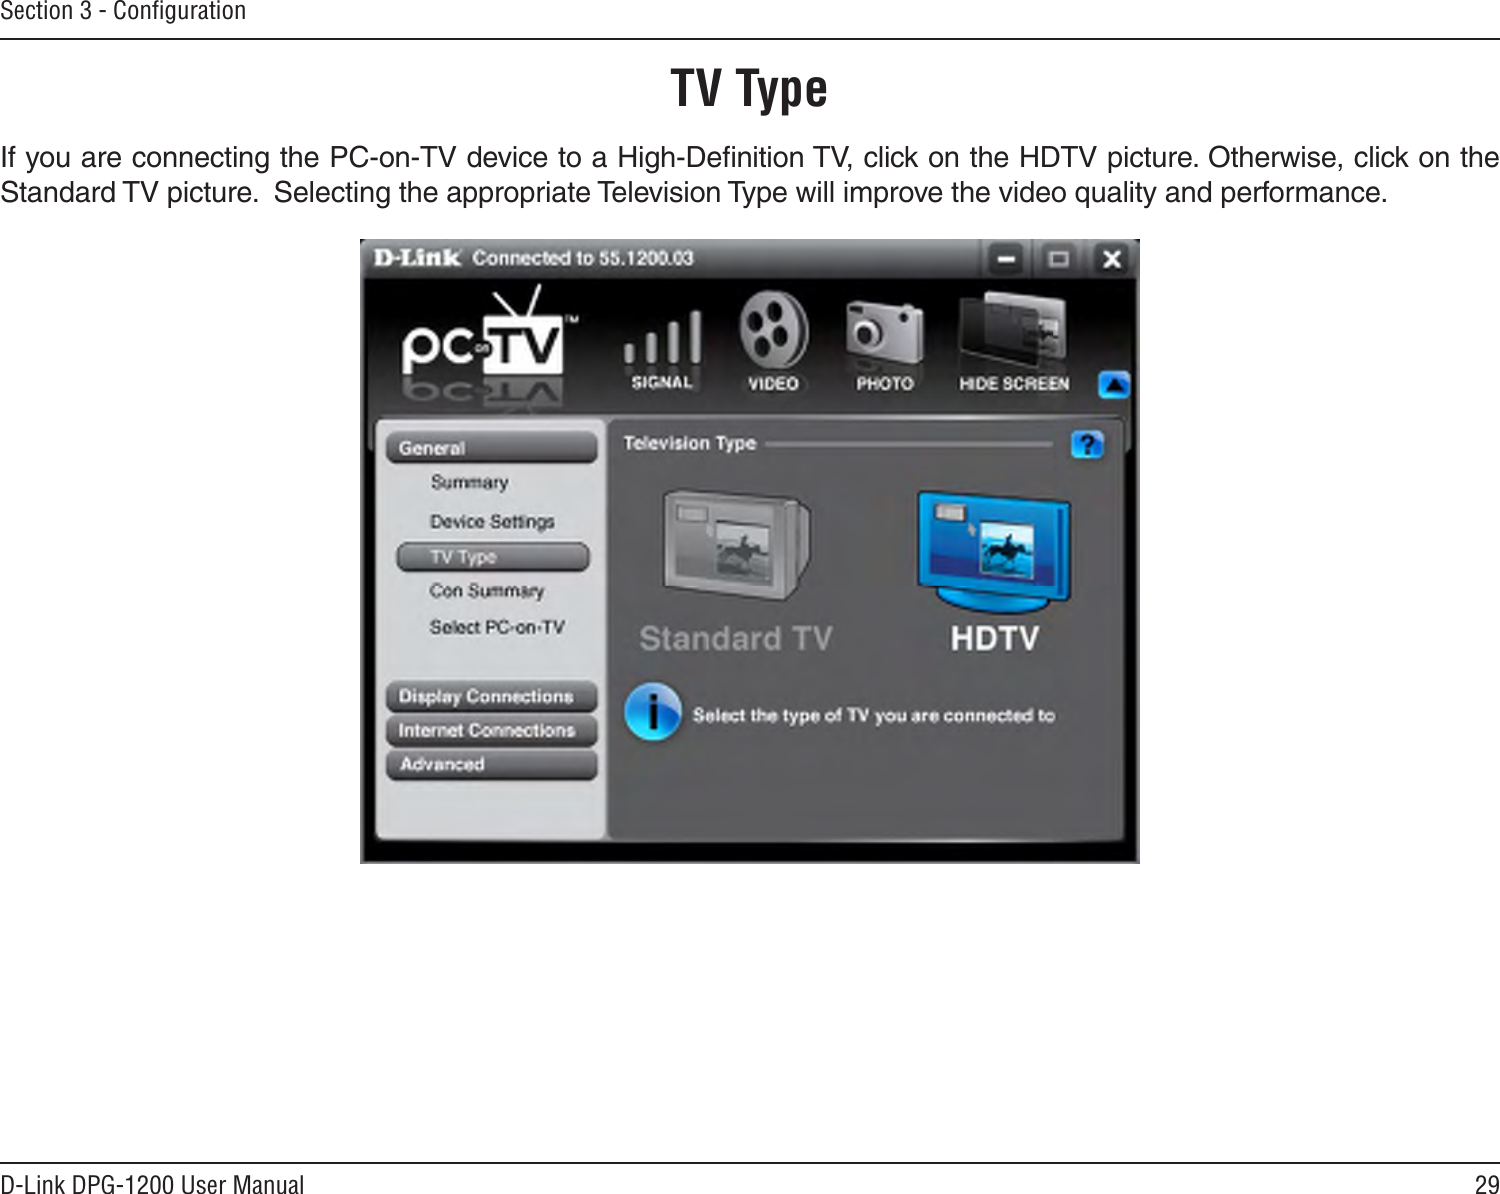 29D-Link DPG-1200 User ManualSection 3 - ConﬁgurationTV TypeIf you are connecting the PC-on-TV device to a High-Deﬁnition TV, click on the HDTV picture. Otherwise, click on the Standard TV picture.  Selecting the appropriate Television Type will improve the video quality and performance.